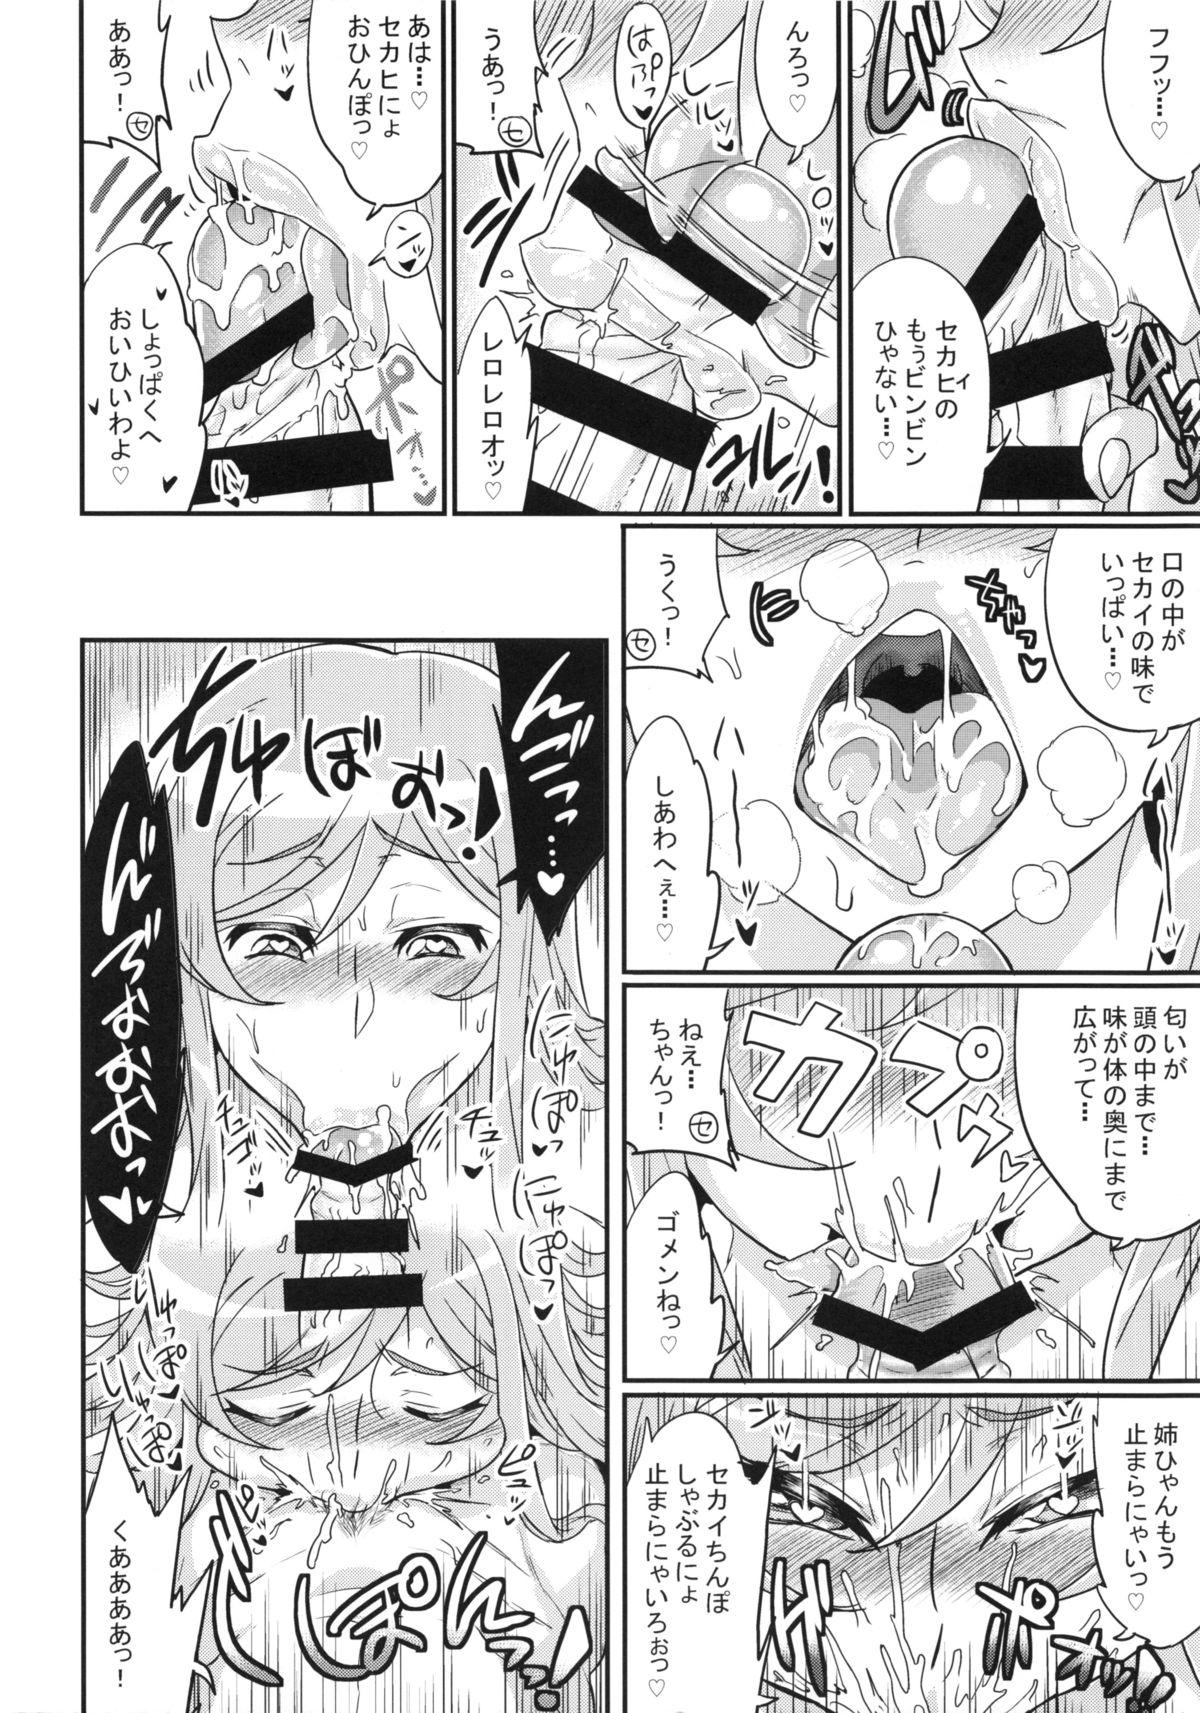 Tanned Mirai Nee-chan to Tsukurou! - Gundam build fighters try Toy - Page 5